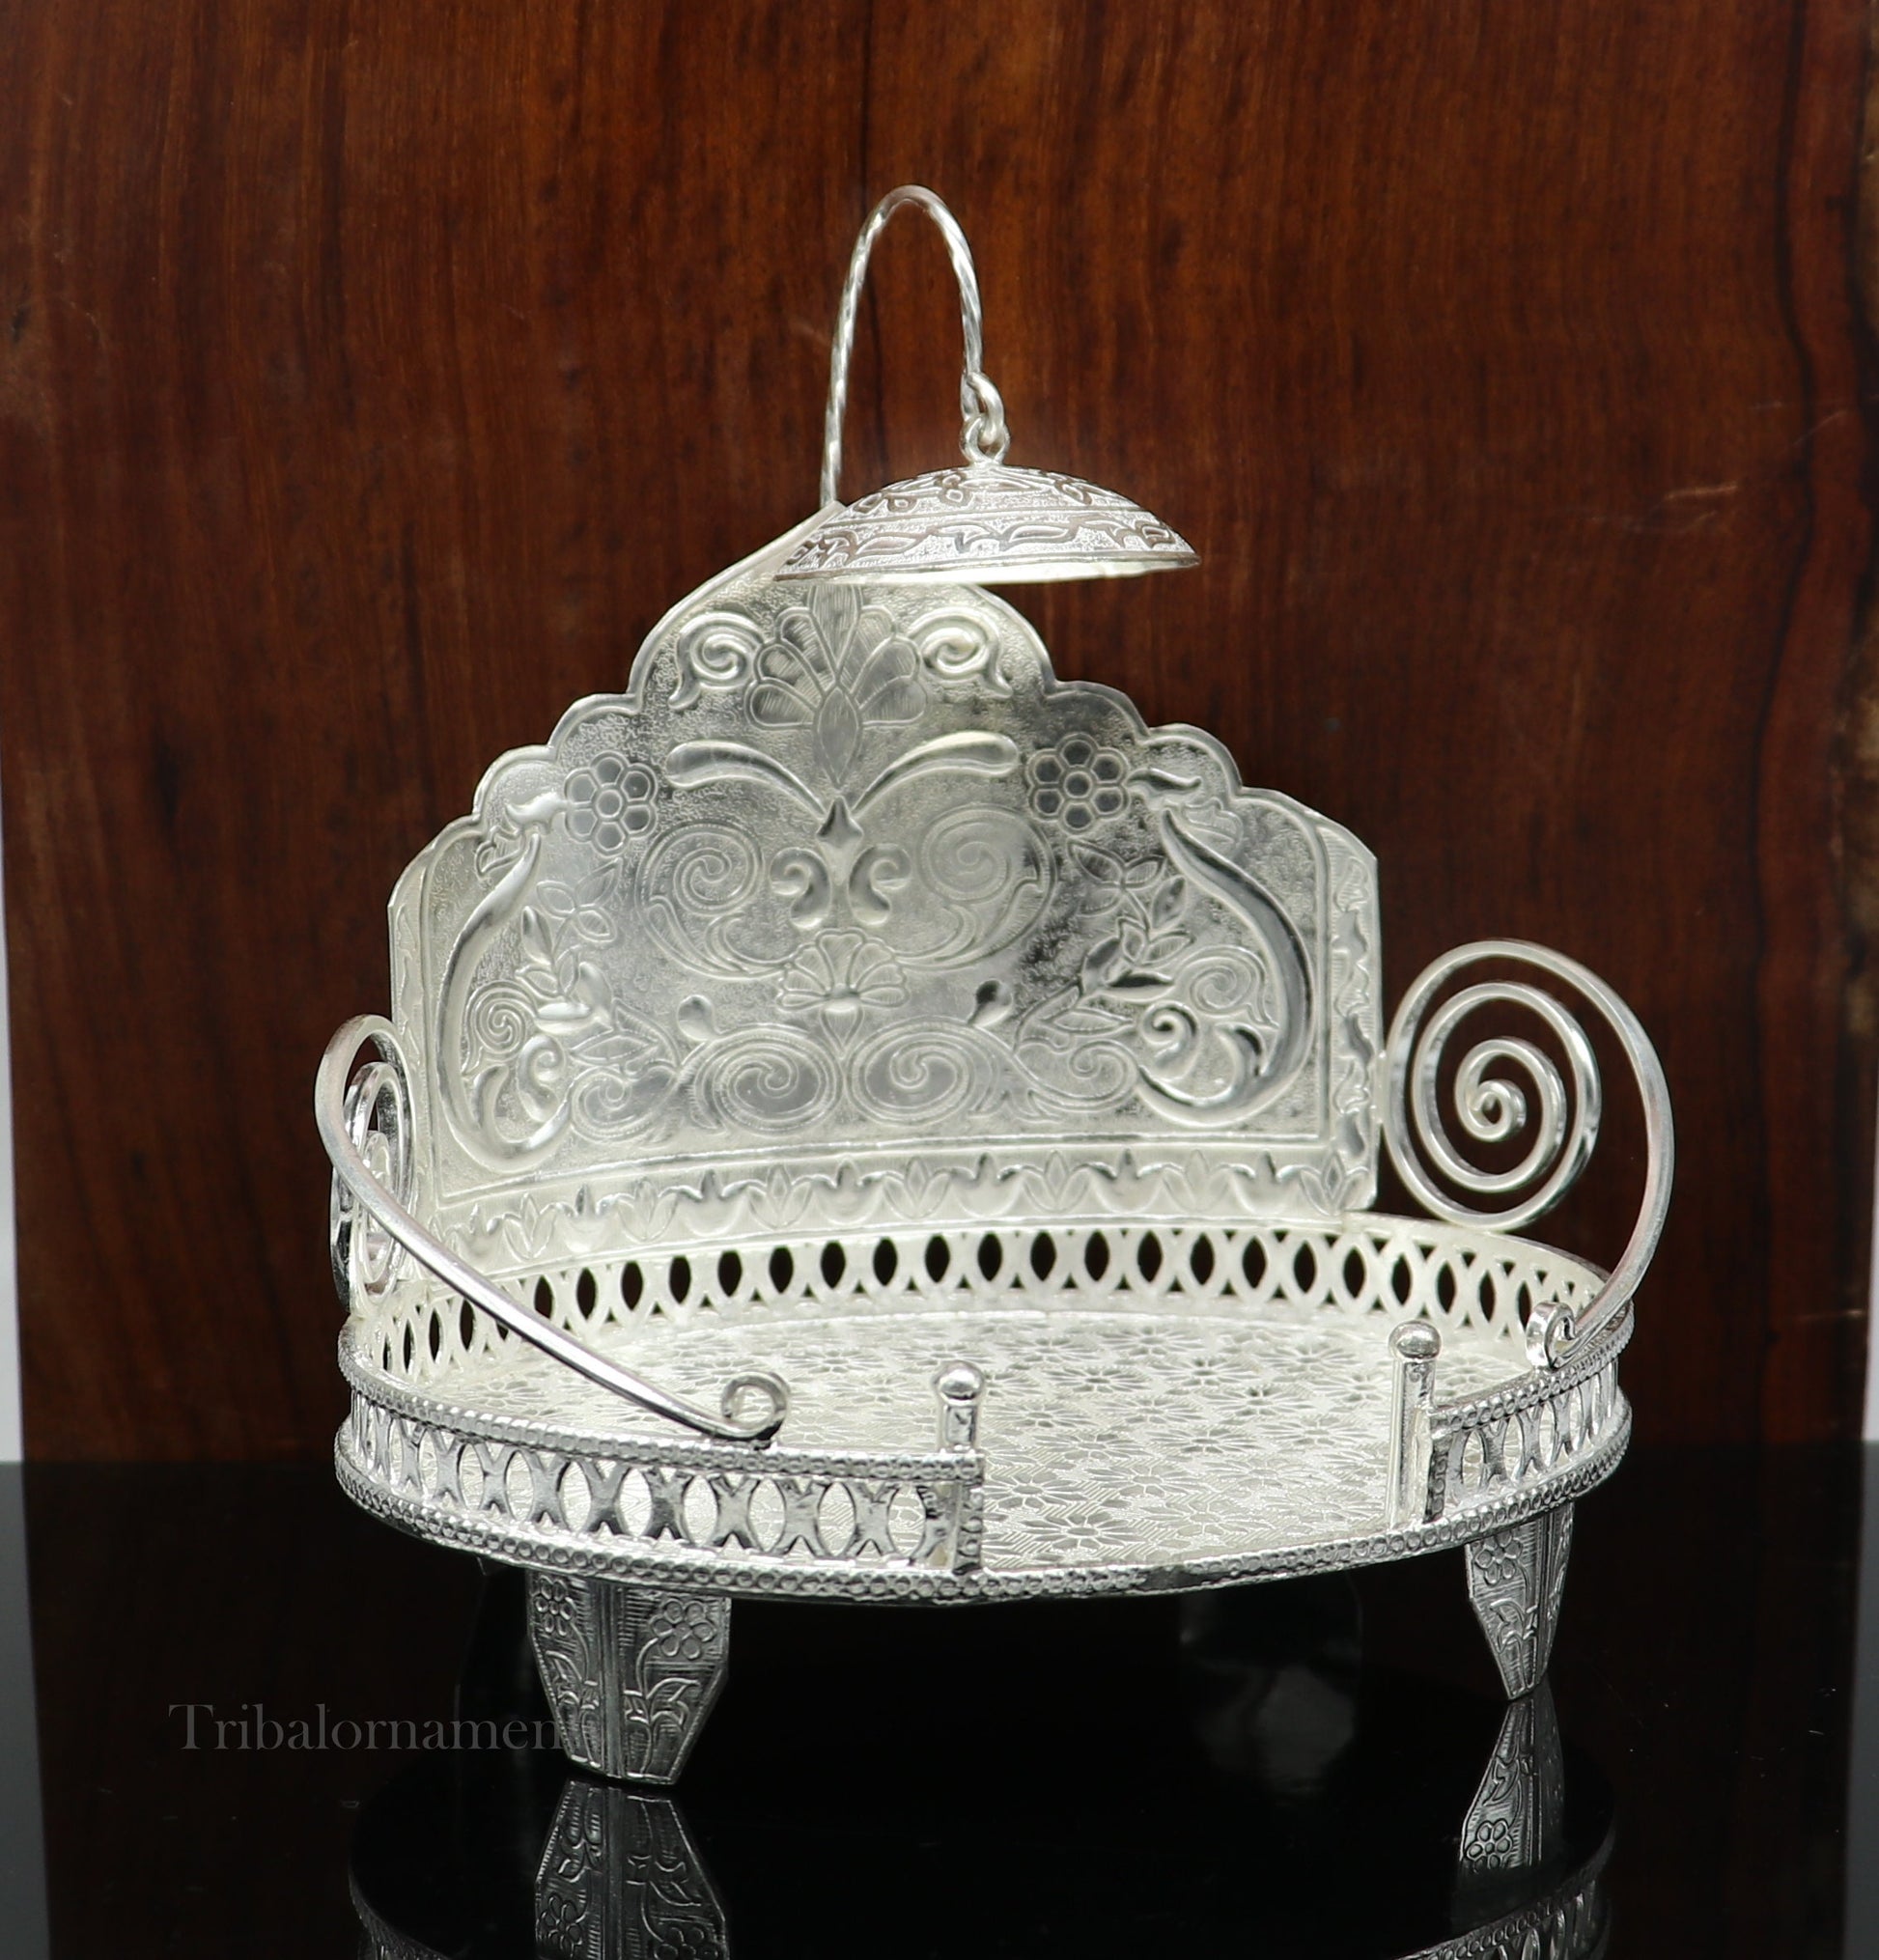 925 sterling silver handcrafted solid Sinhasan, idol god throne, god statue's stand chair, temple puja article best collectible gift su569 - TRIBAL ORNAMENTS